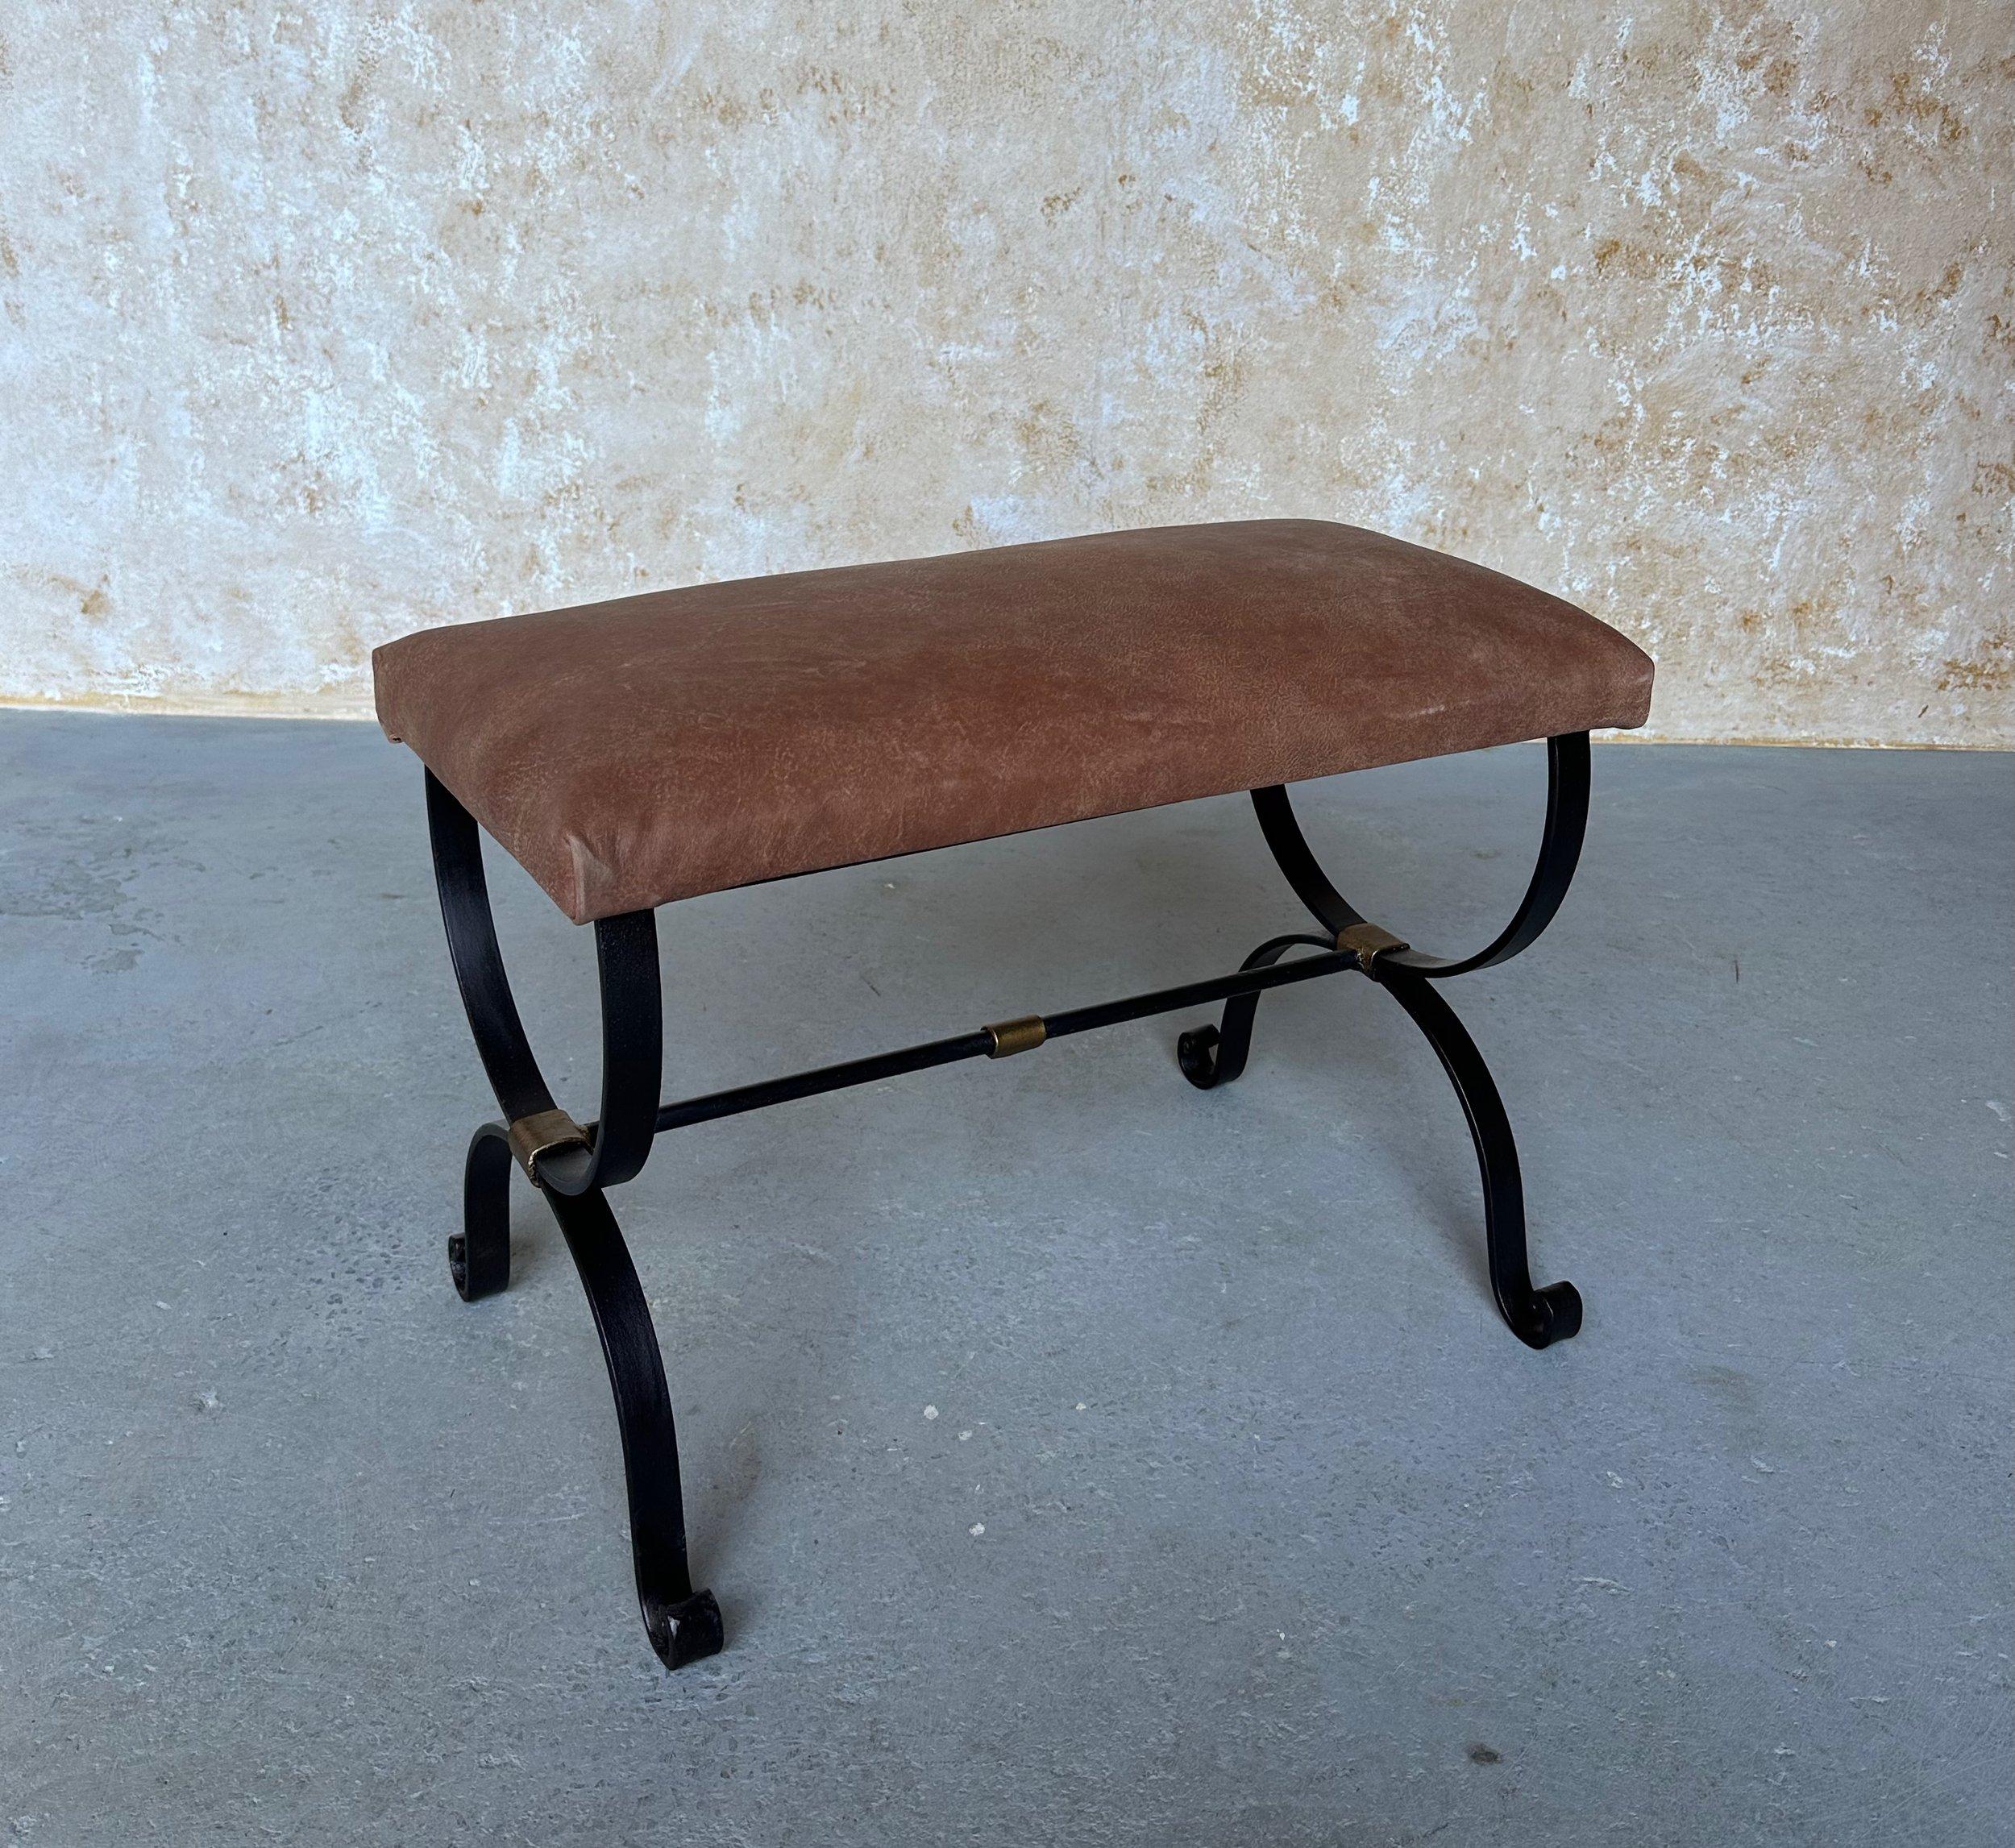 This elegant iron bench was recently crafted by skilled artisans and features scrolled legs and a stretcher with decorative bands that are highlighted in hand-applied gold. Handmade by expert European craftsmen, it has a hand forged iron base with a